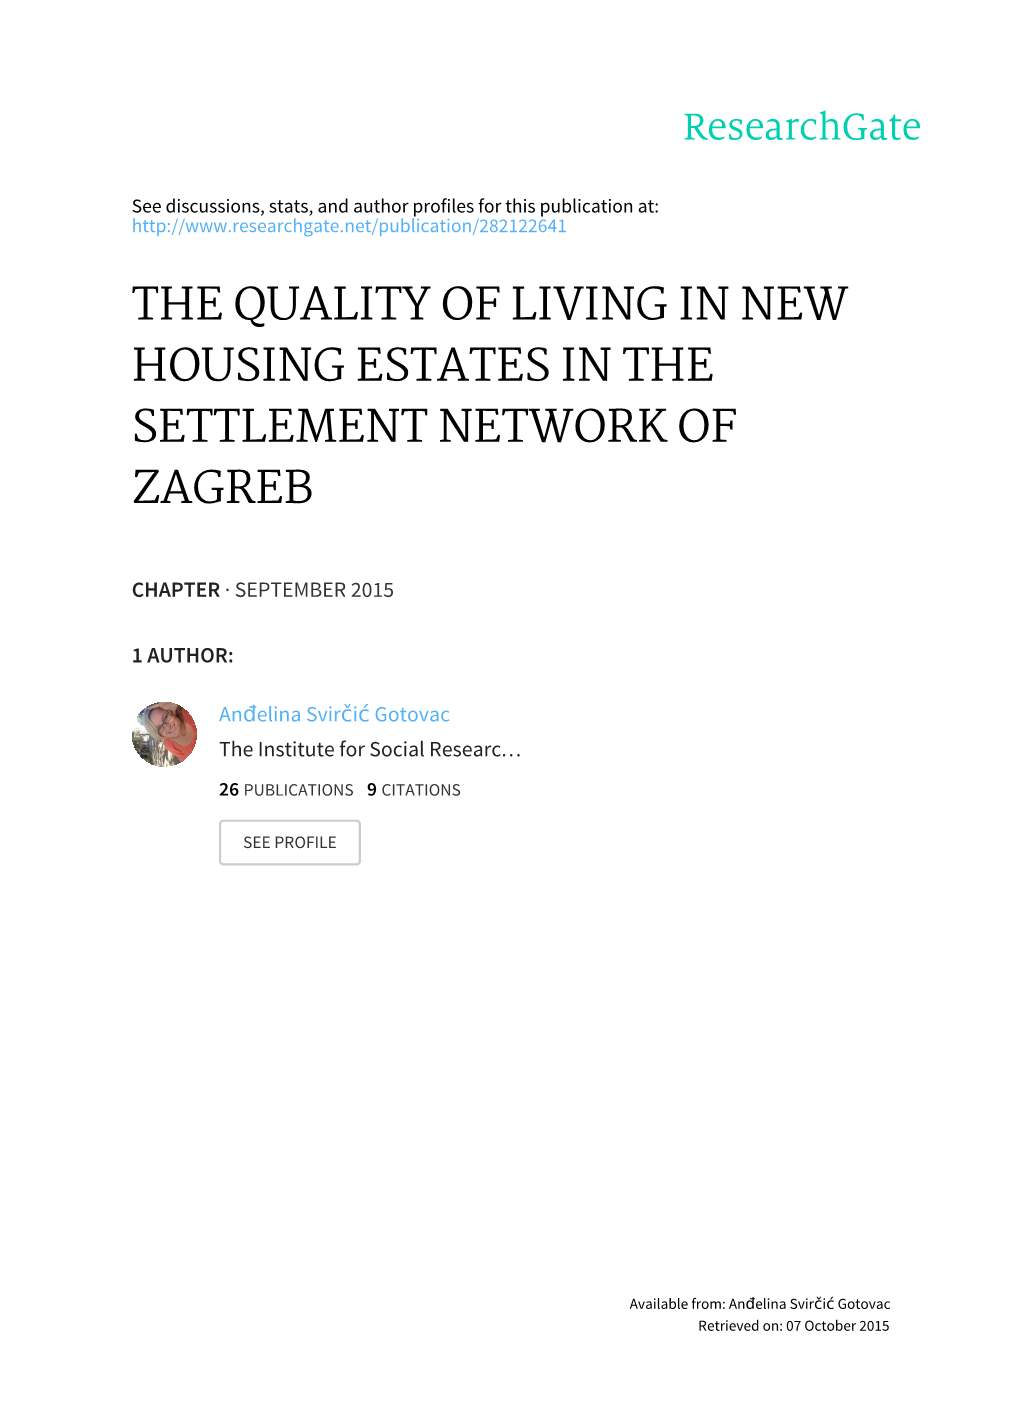 The Quality of Living in New Housing Estates in the Settlement Network of Zagreb